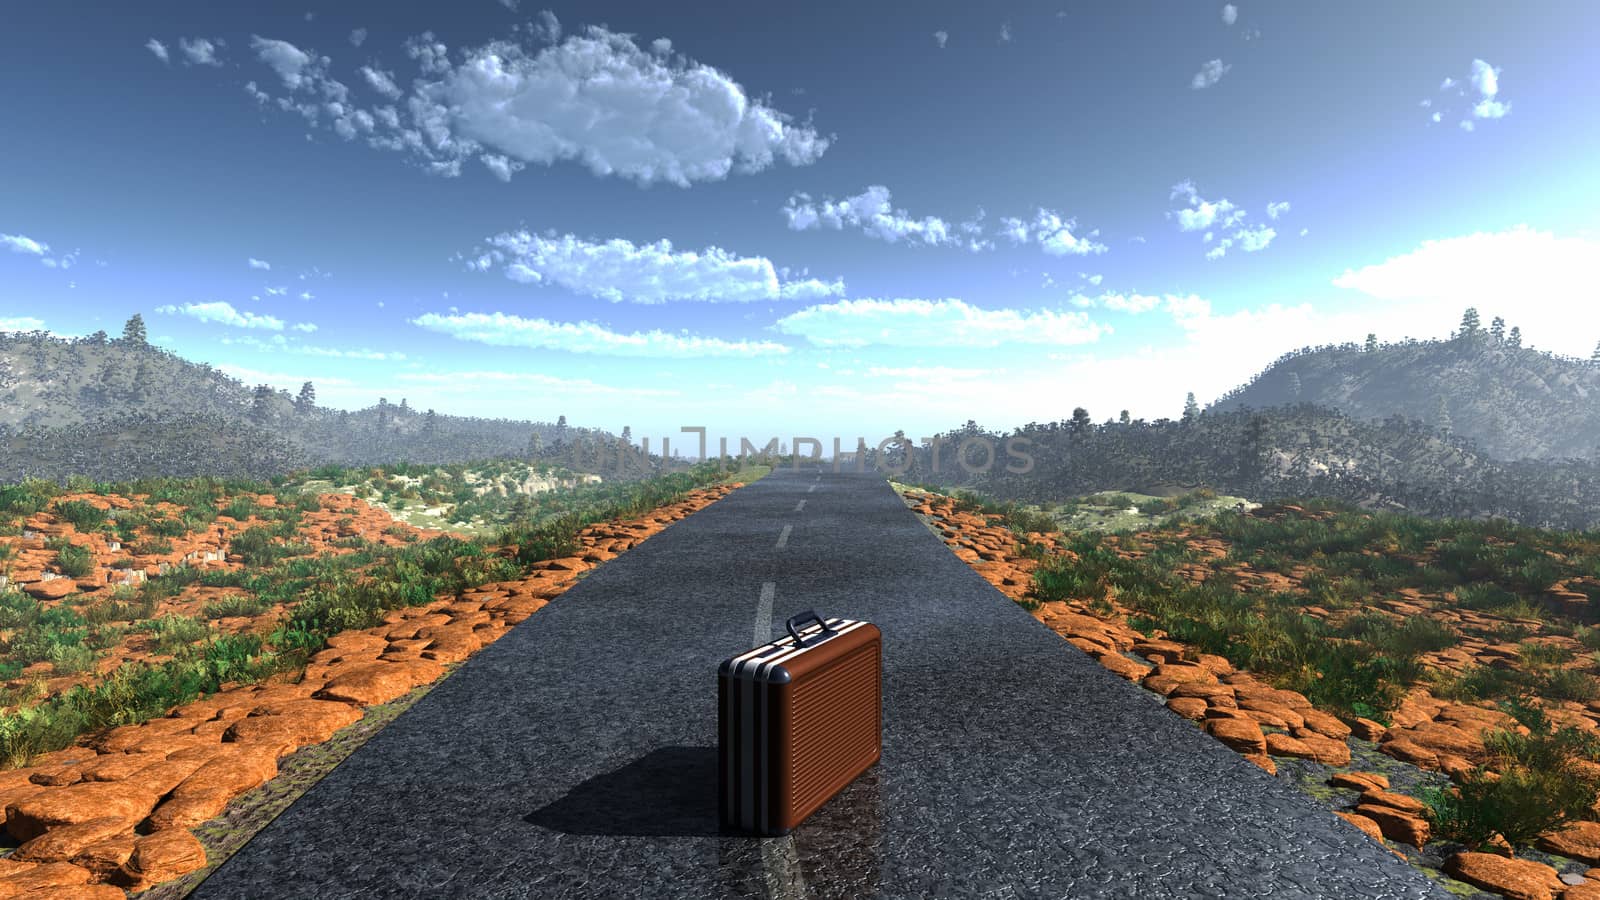 suitcase on a deserted road as adventure concept background